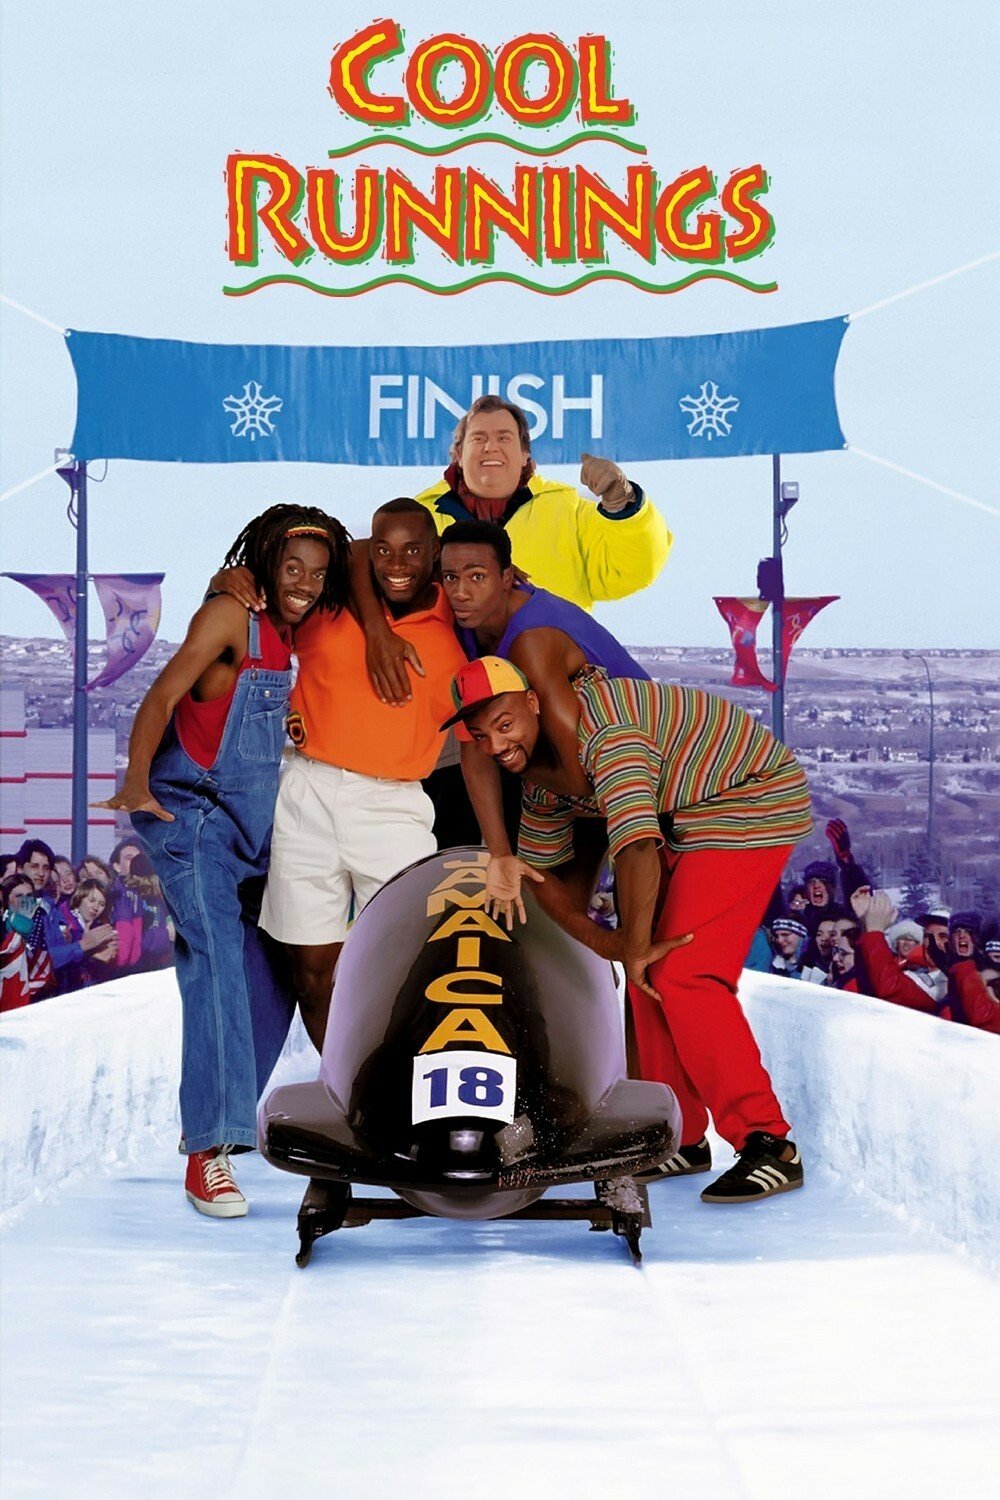 Il poster del film Cool Runnings